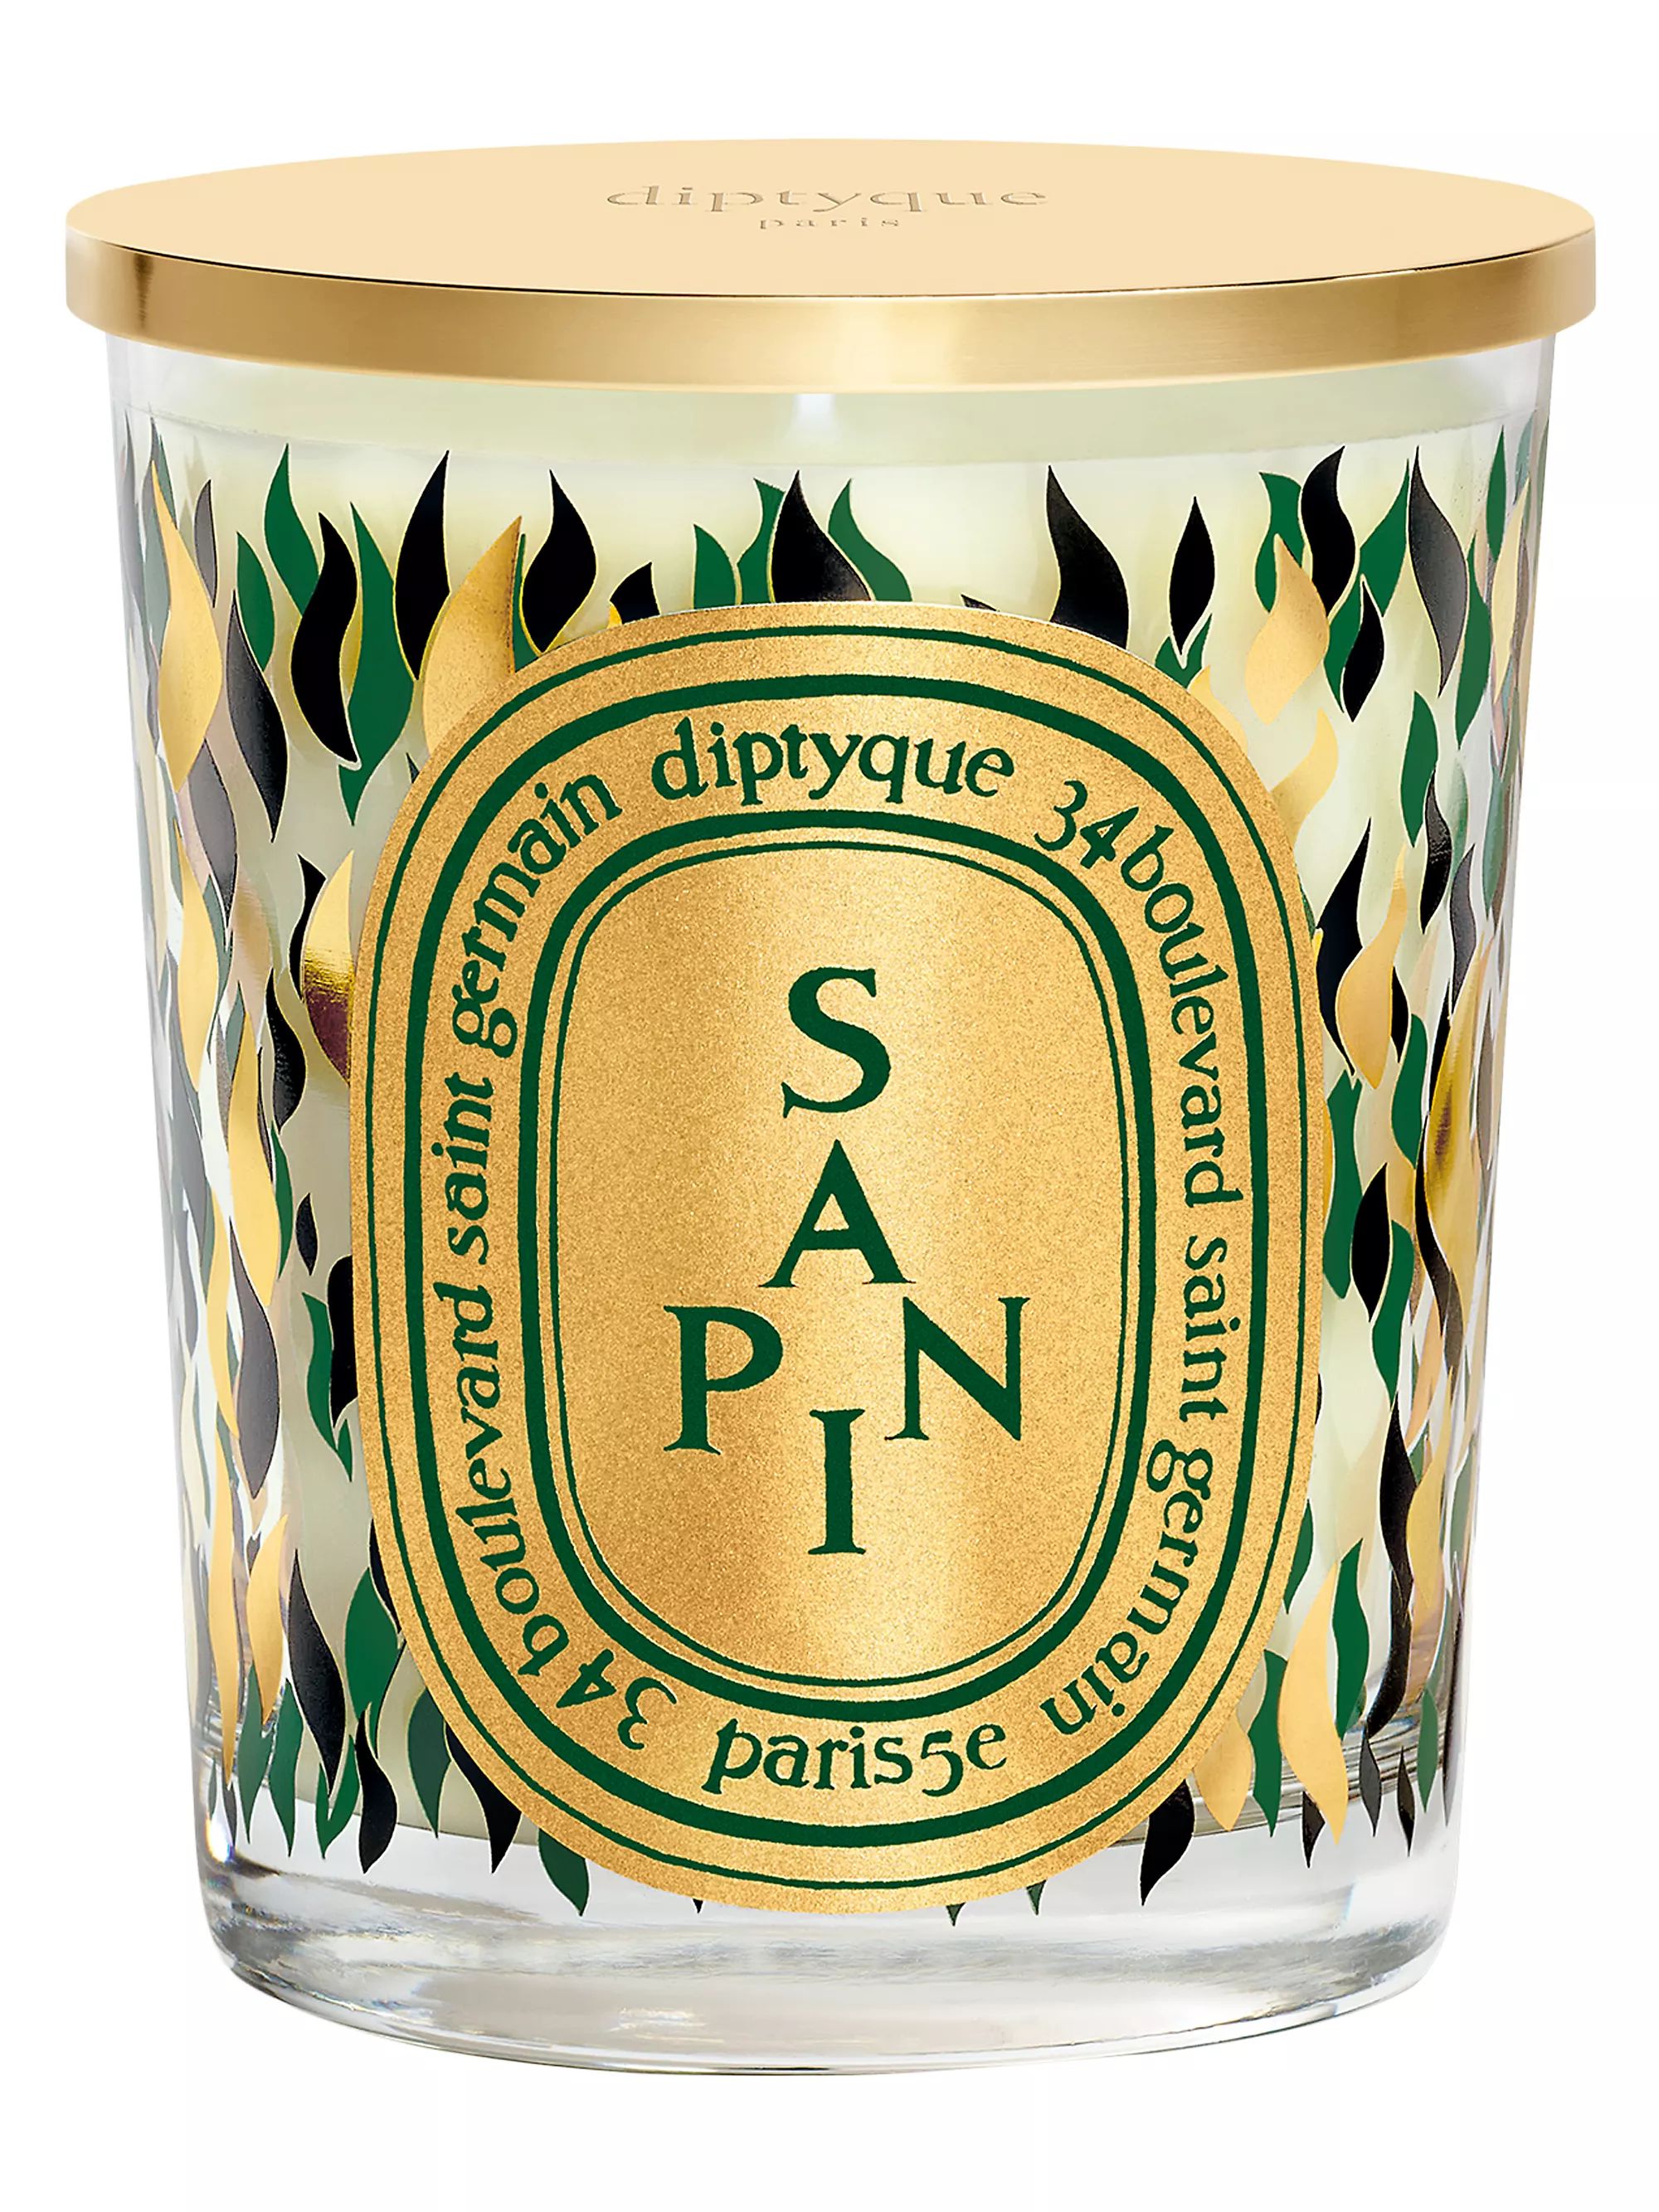 Sapin (Pine) Scented Candle | Saks Fifth Avenue